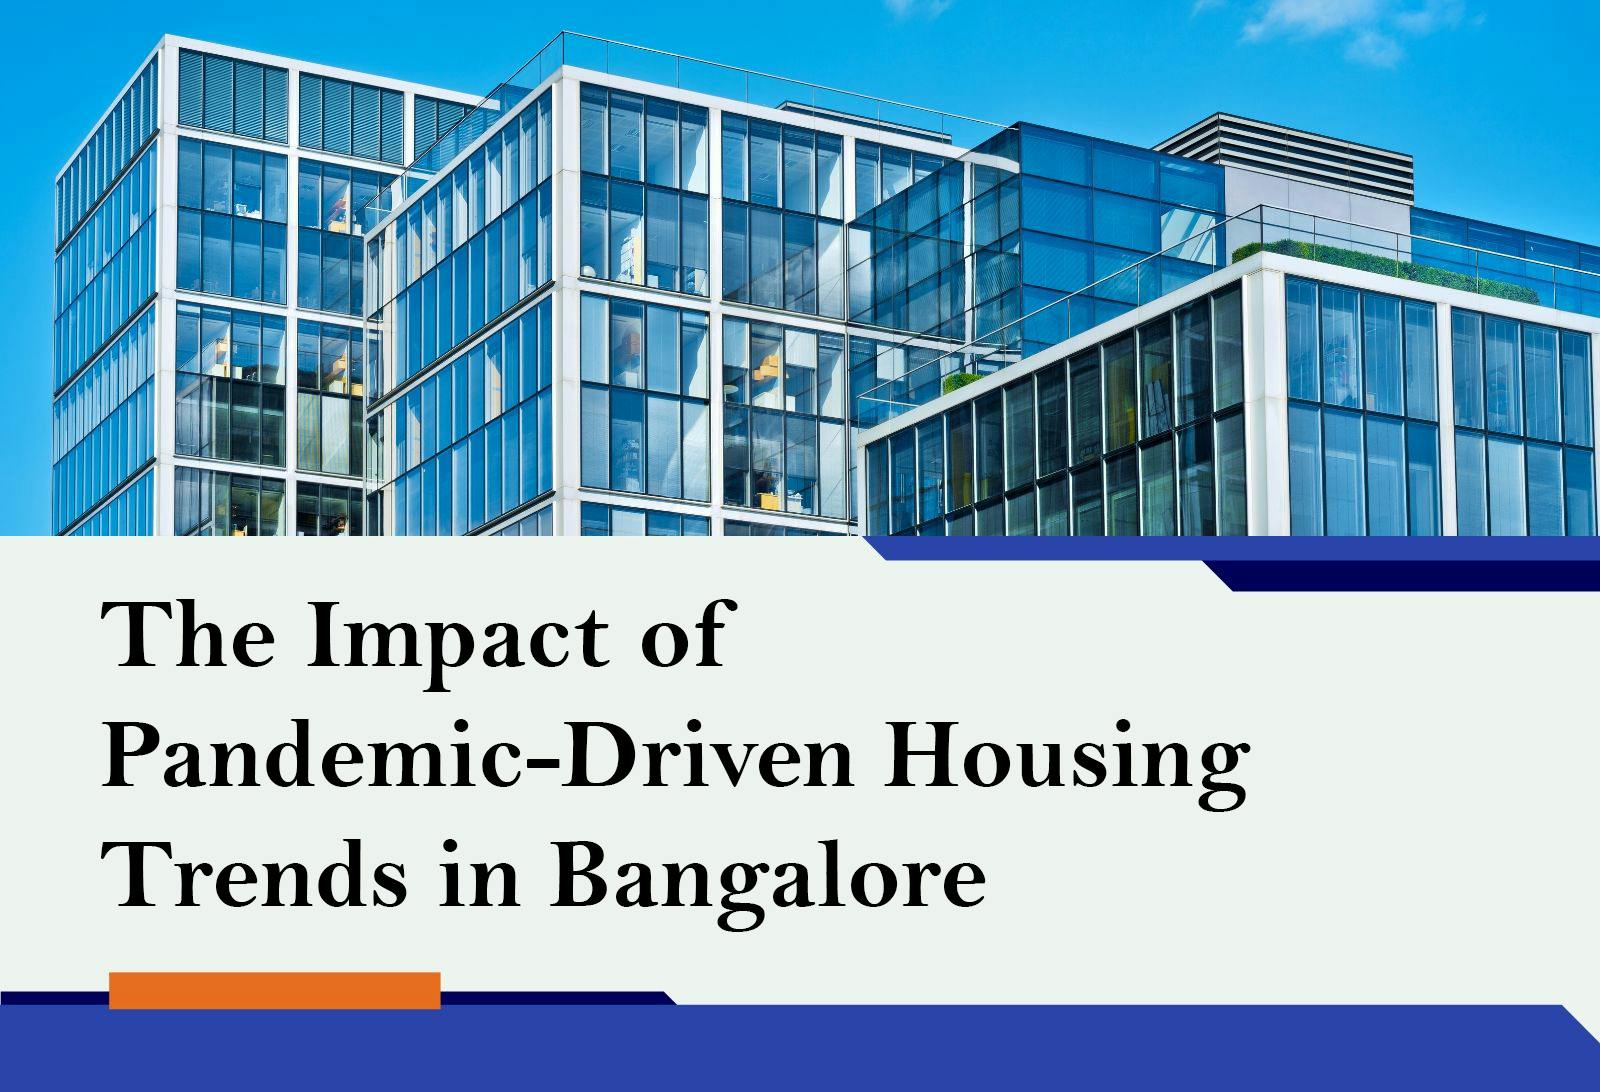 The Impact of Pandemic-Driven Housing Trends in Bangalore